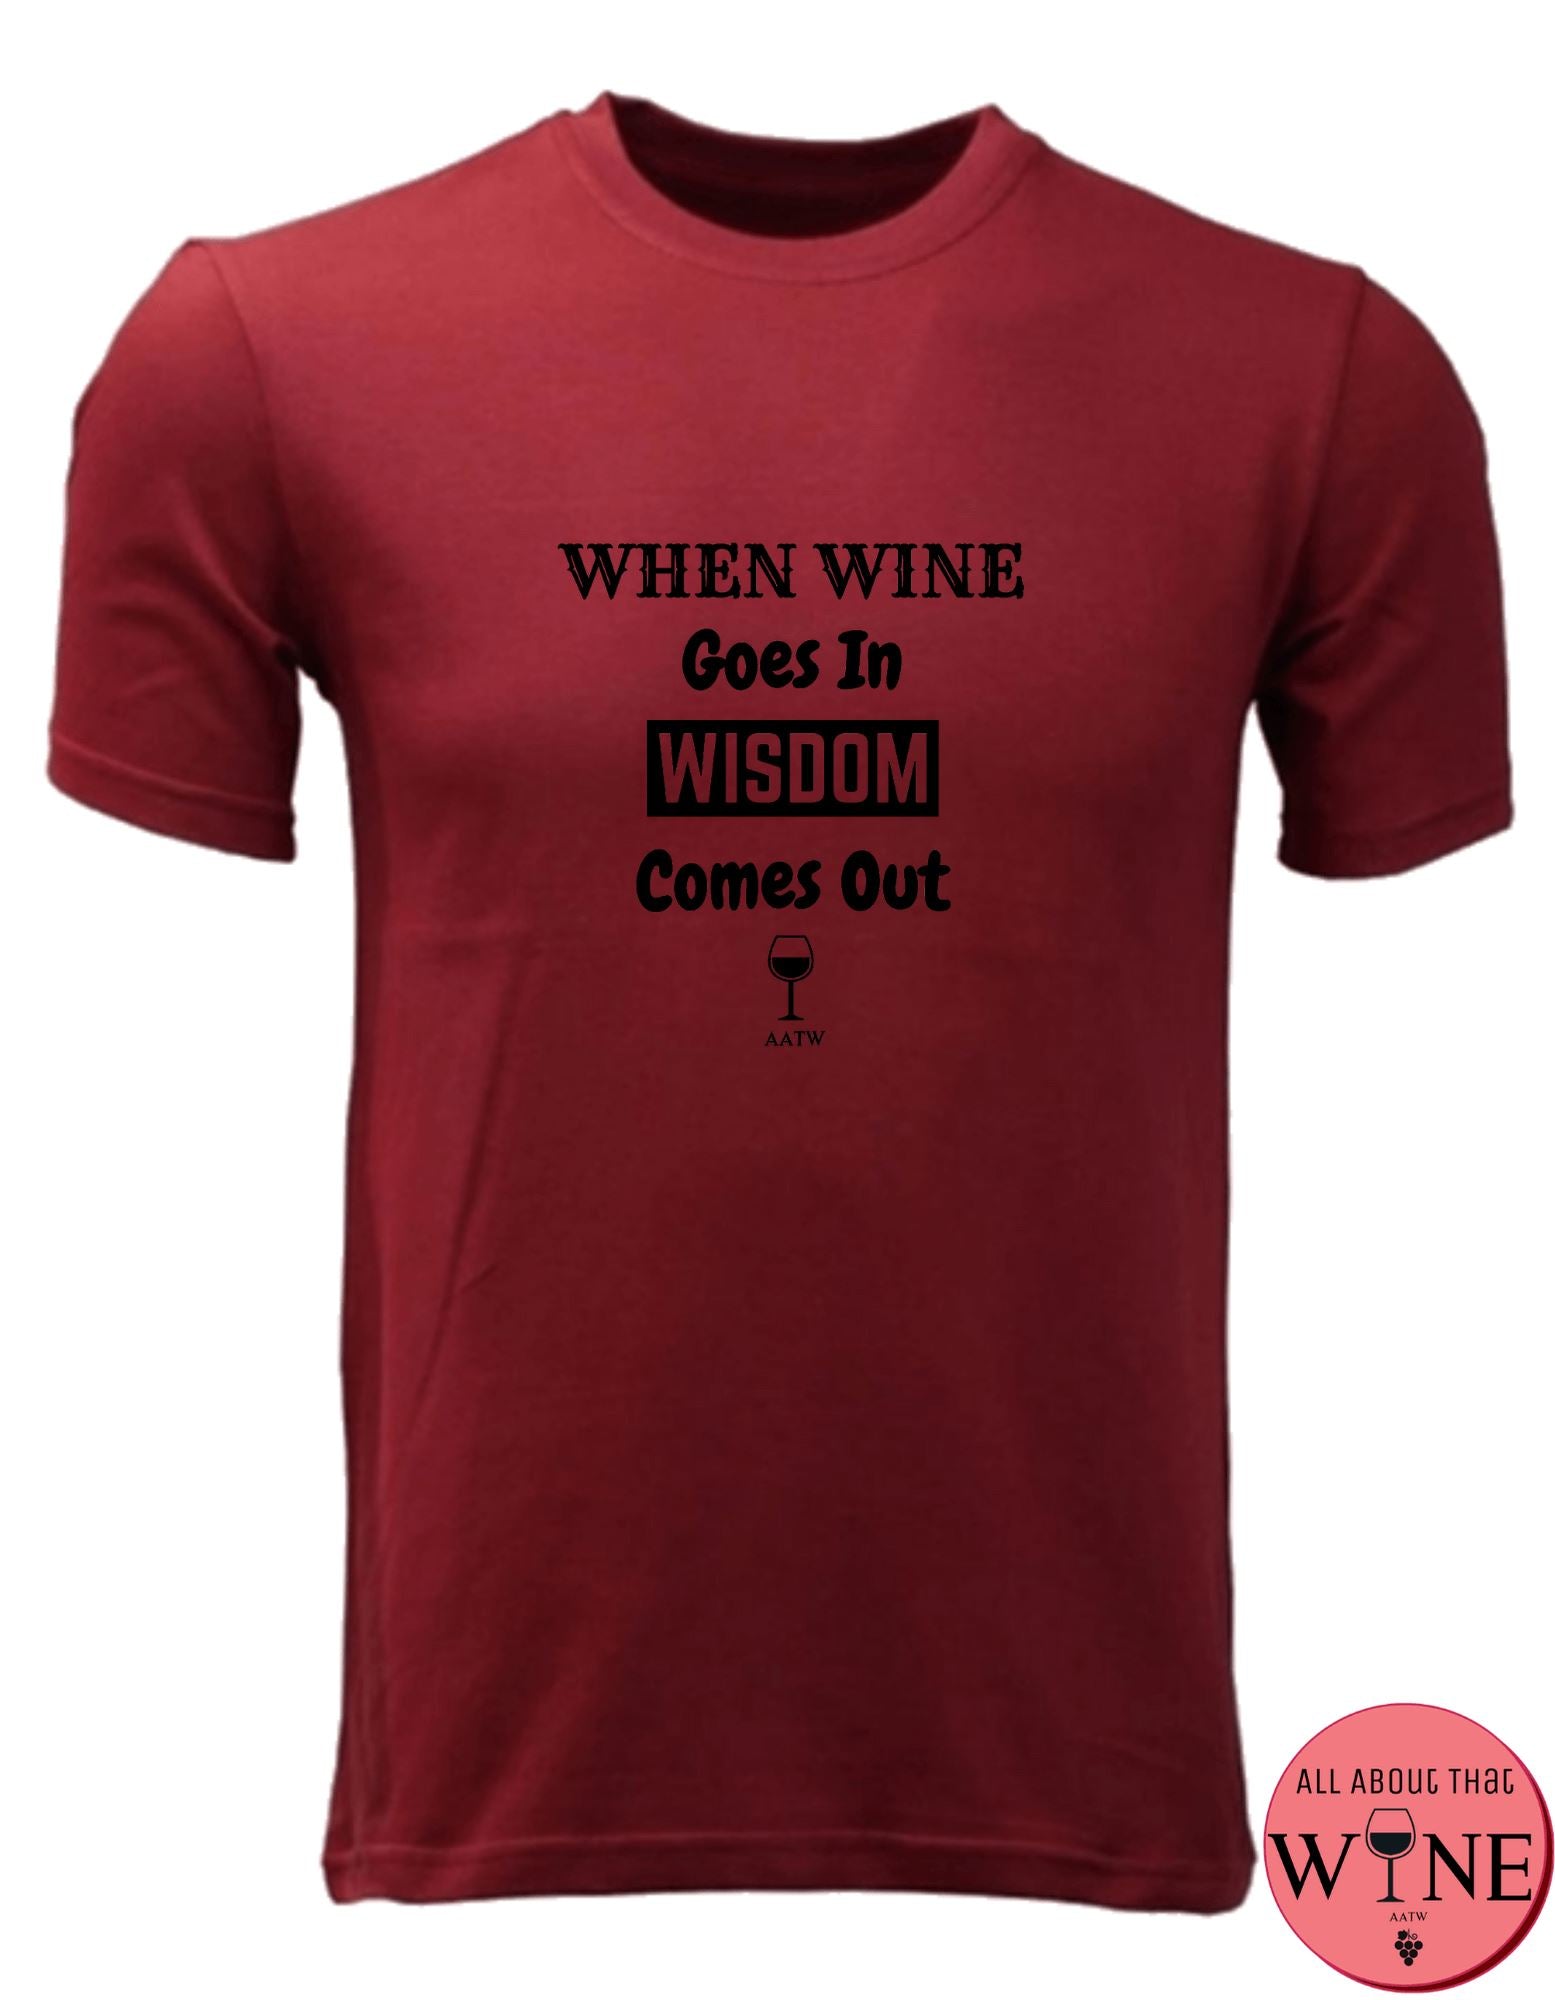 When Wine Goes In - Unisex/Male M Deep red with black